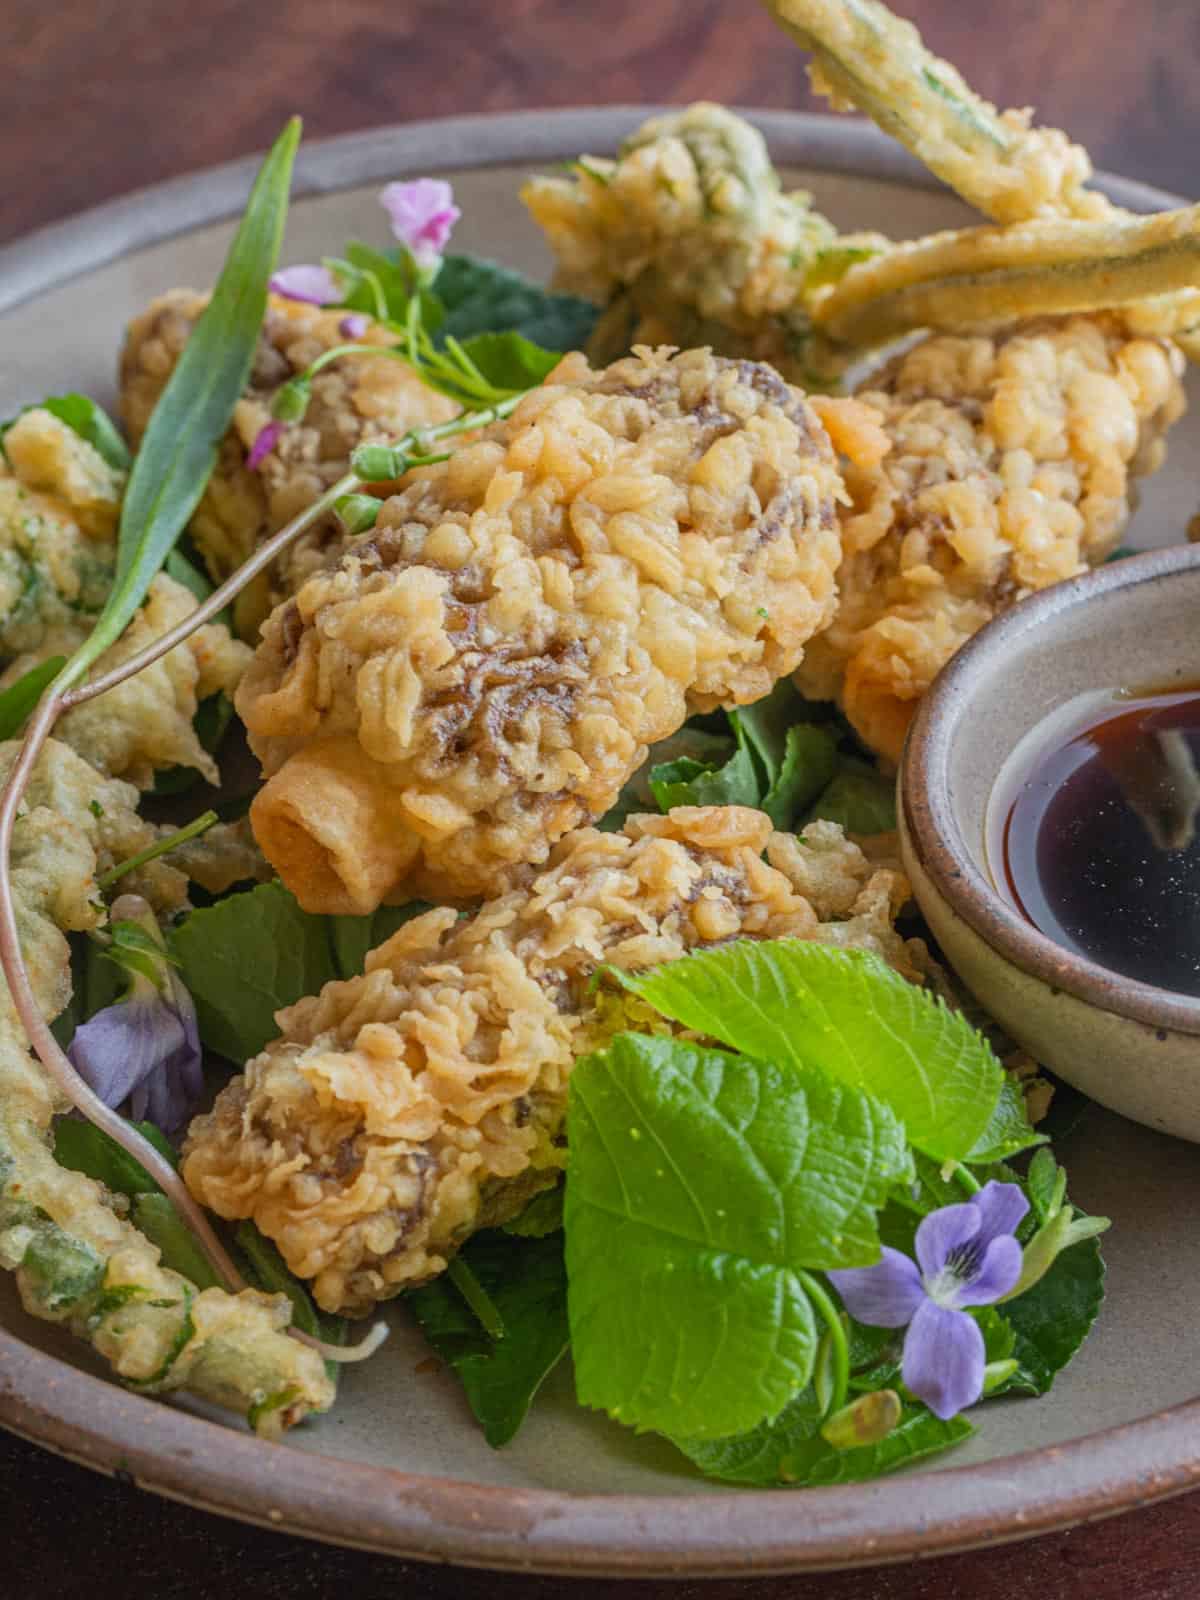 Morel mushroom tempura with basswood leaves, ramp soy dipping sauce and fried fiddleheads on a plate ready to eat. 